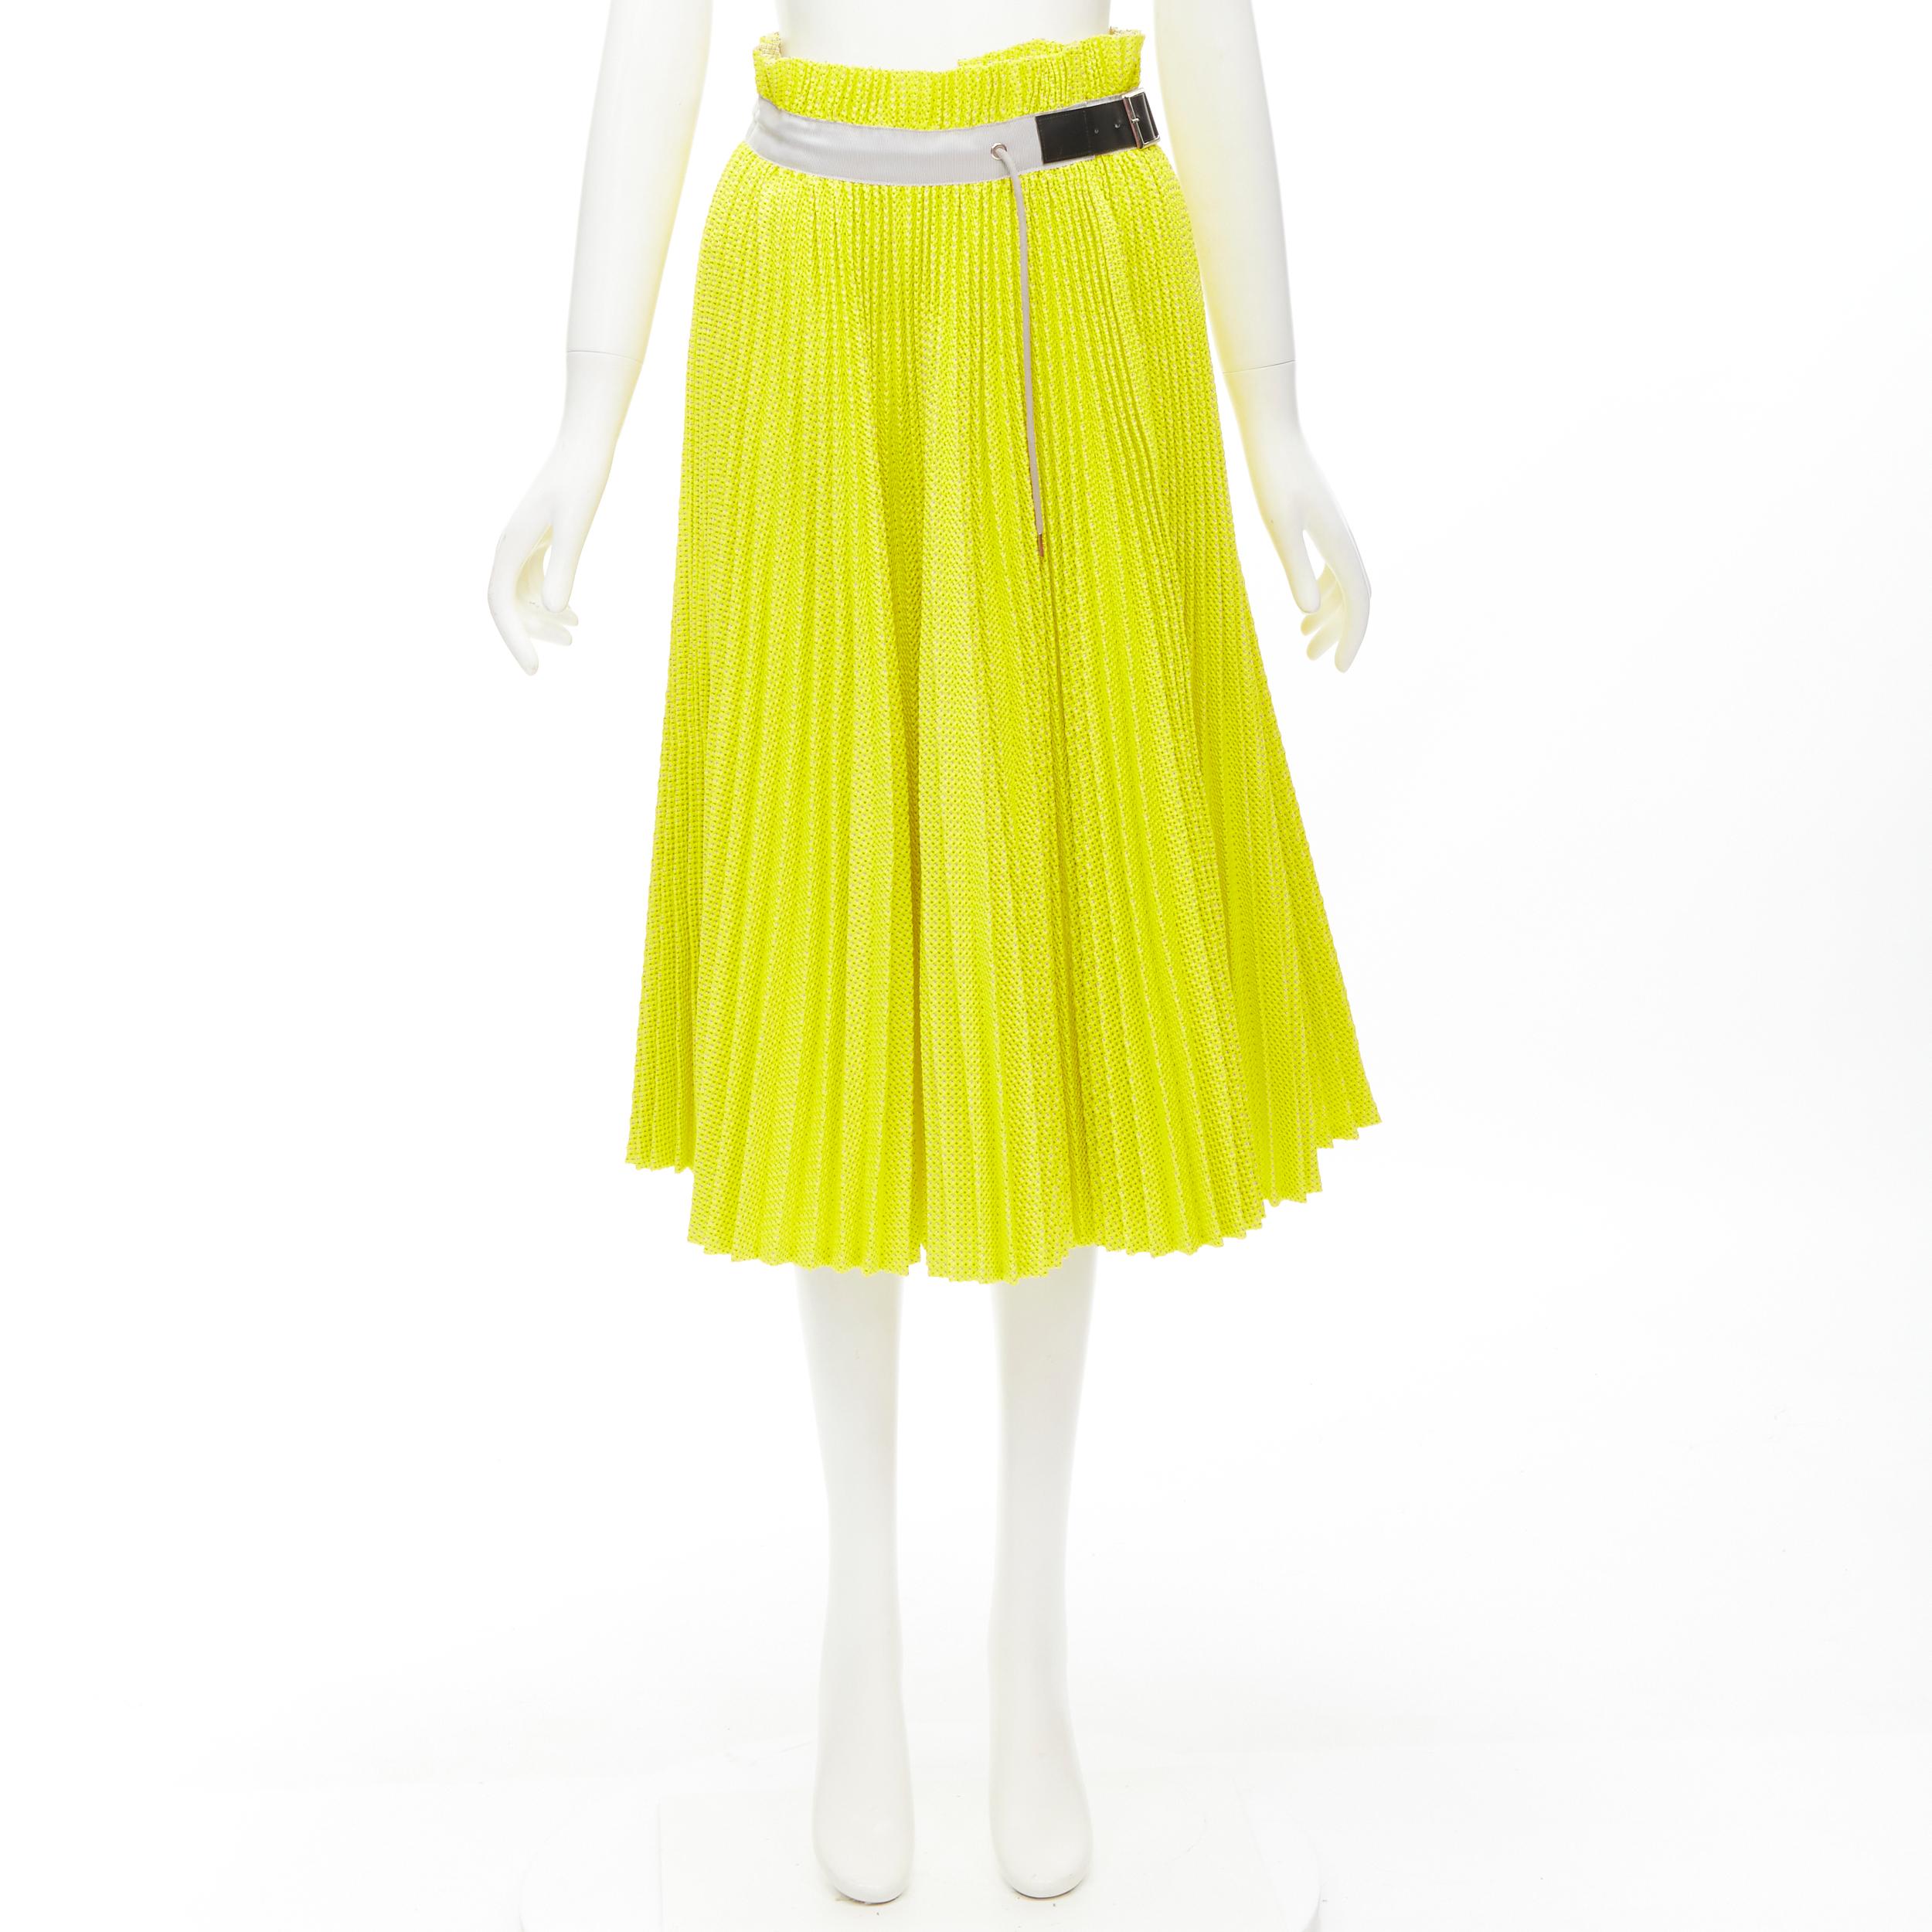 Women's SACAI Chitose Abe yellow grey lattice deconstructed belted pleated skirt S